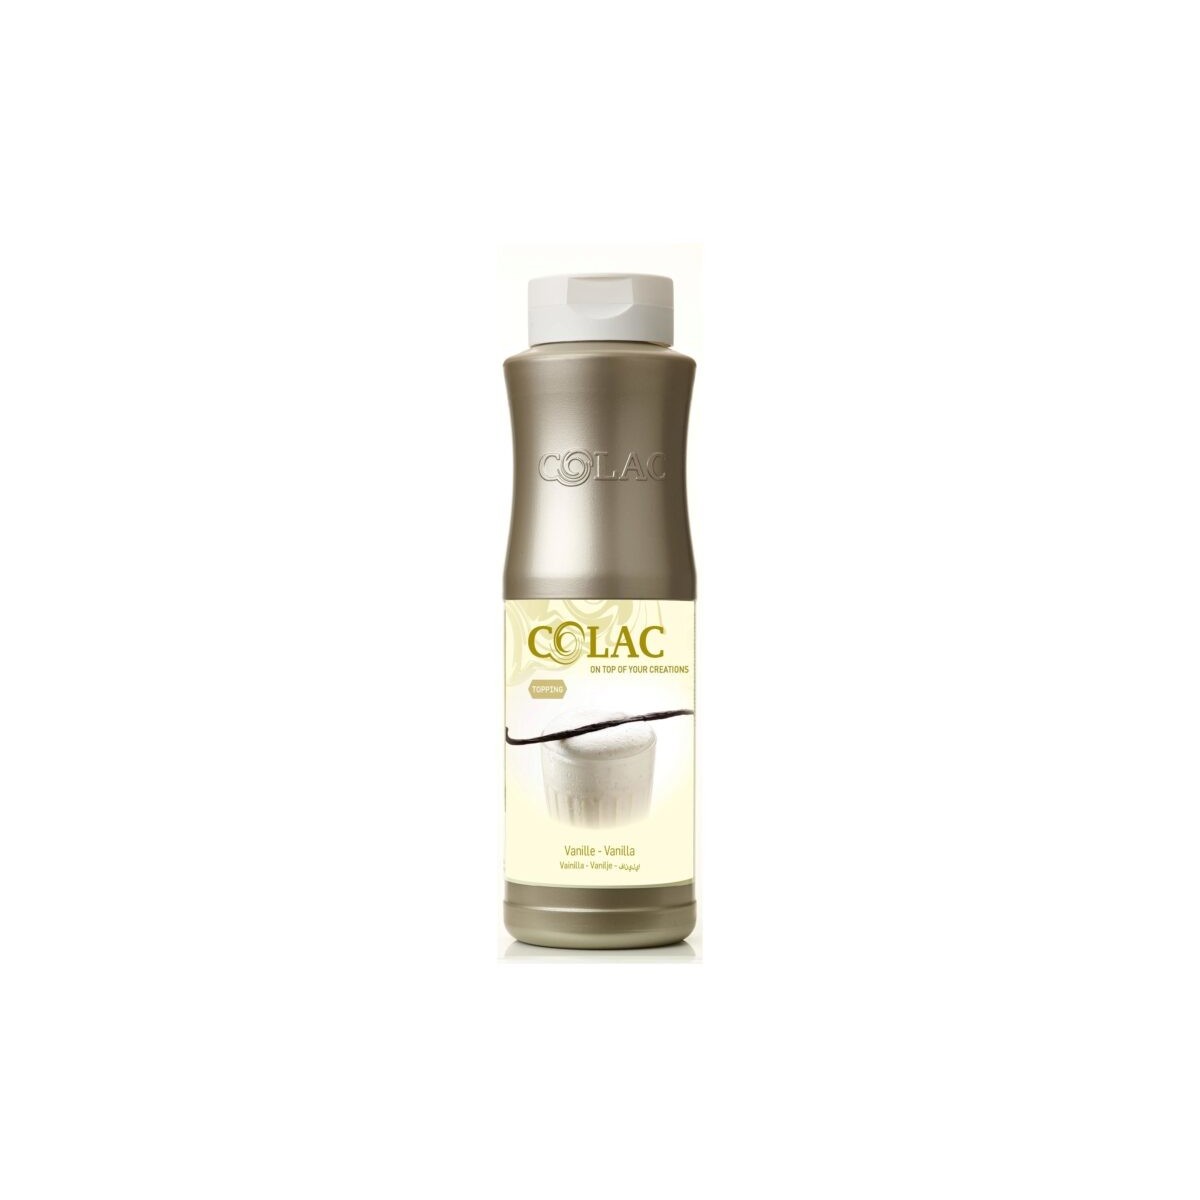 COLAC TOPPING VANILLA 1KG  BOTTLE